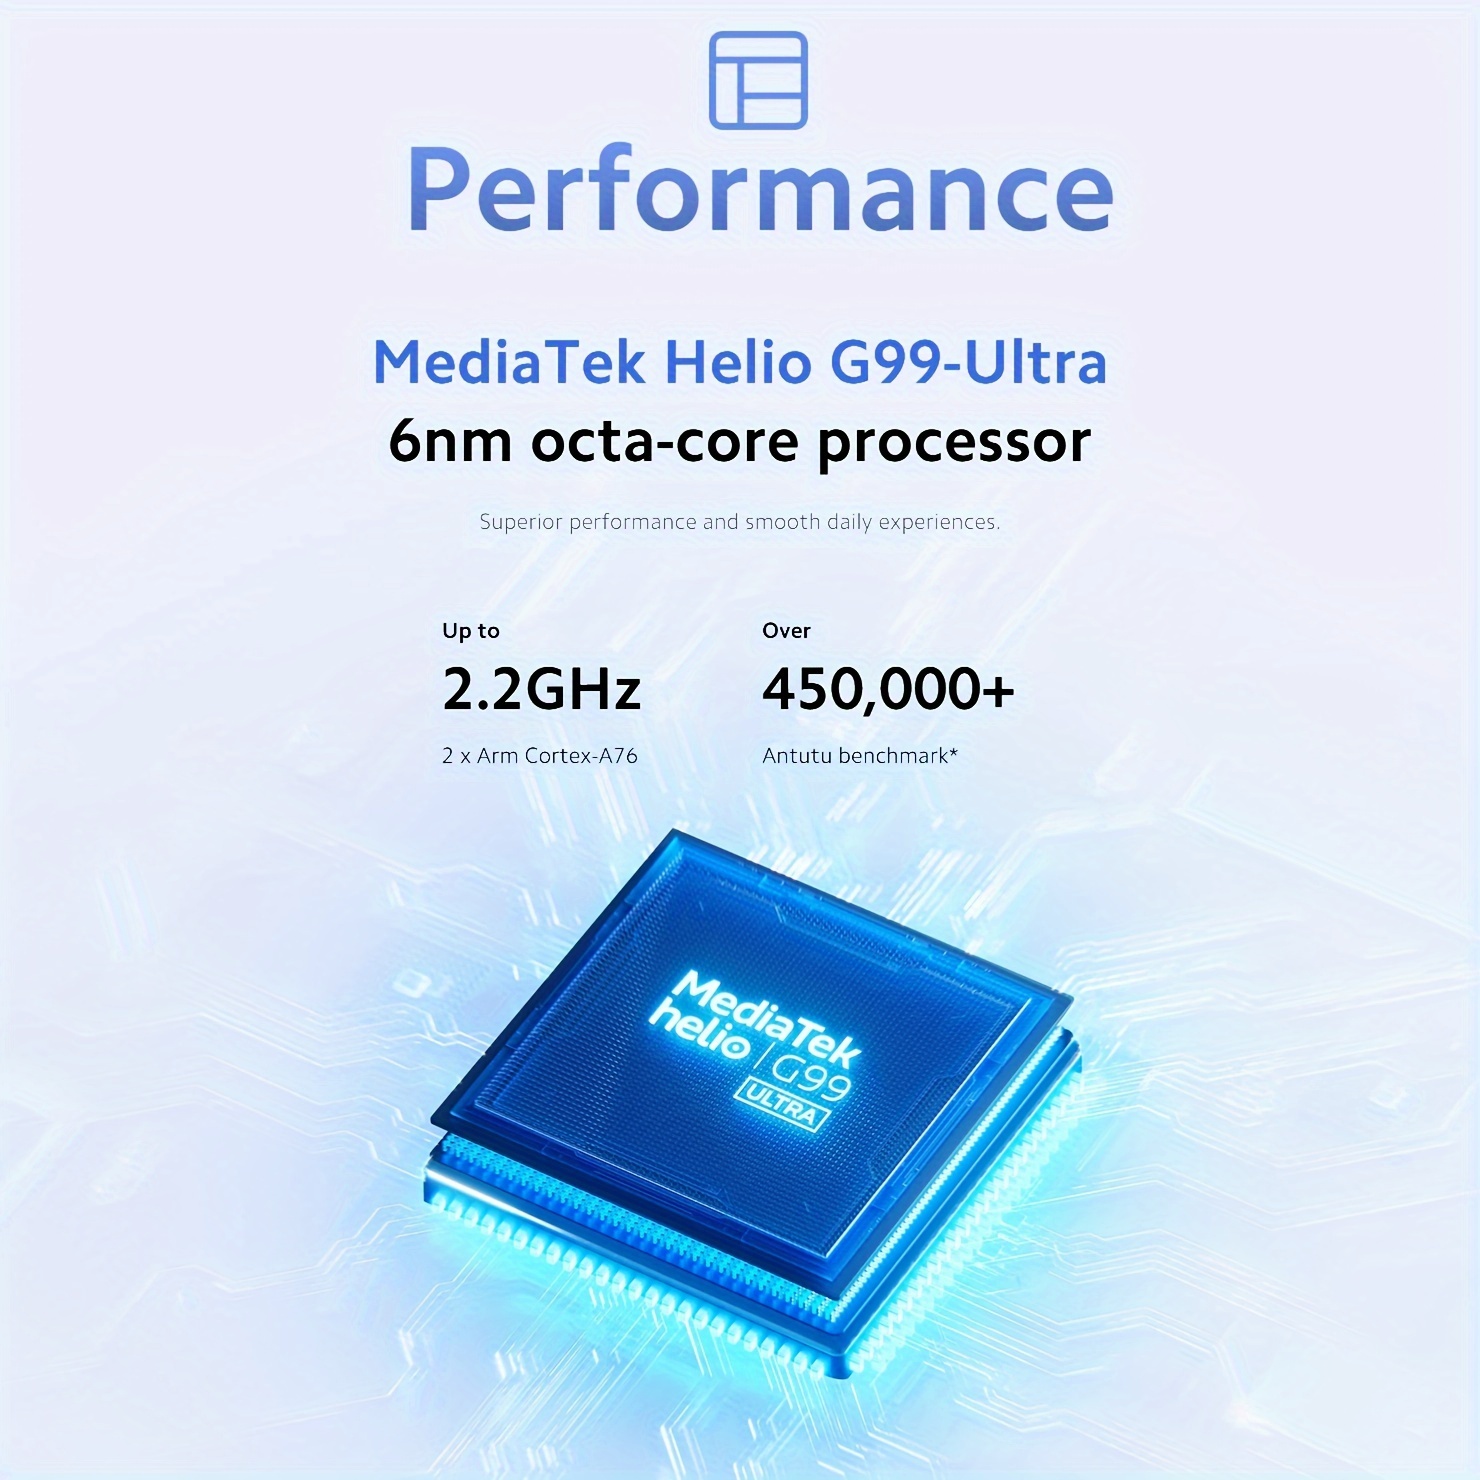 Global Version Xiaomi Redmi Note 13 Pro 4G 200MP OIS Camera 67W Helio G99  Ultra Smartphone 5 NFC 120Hz AMOLED From Mi_fans_store, $300